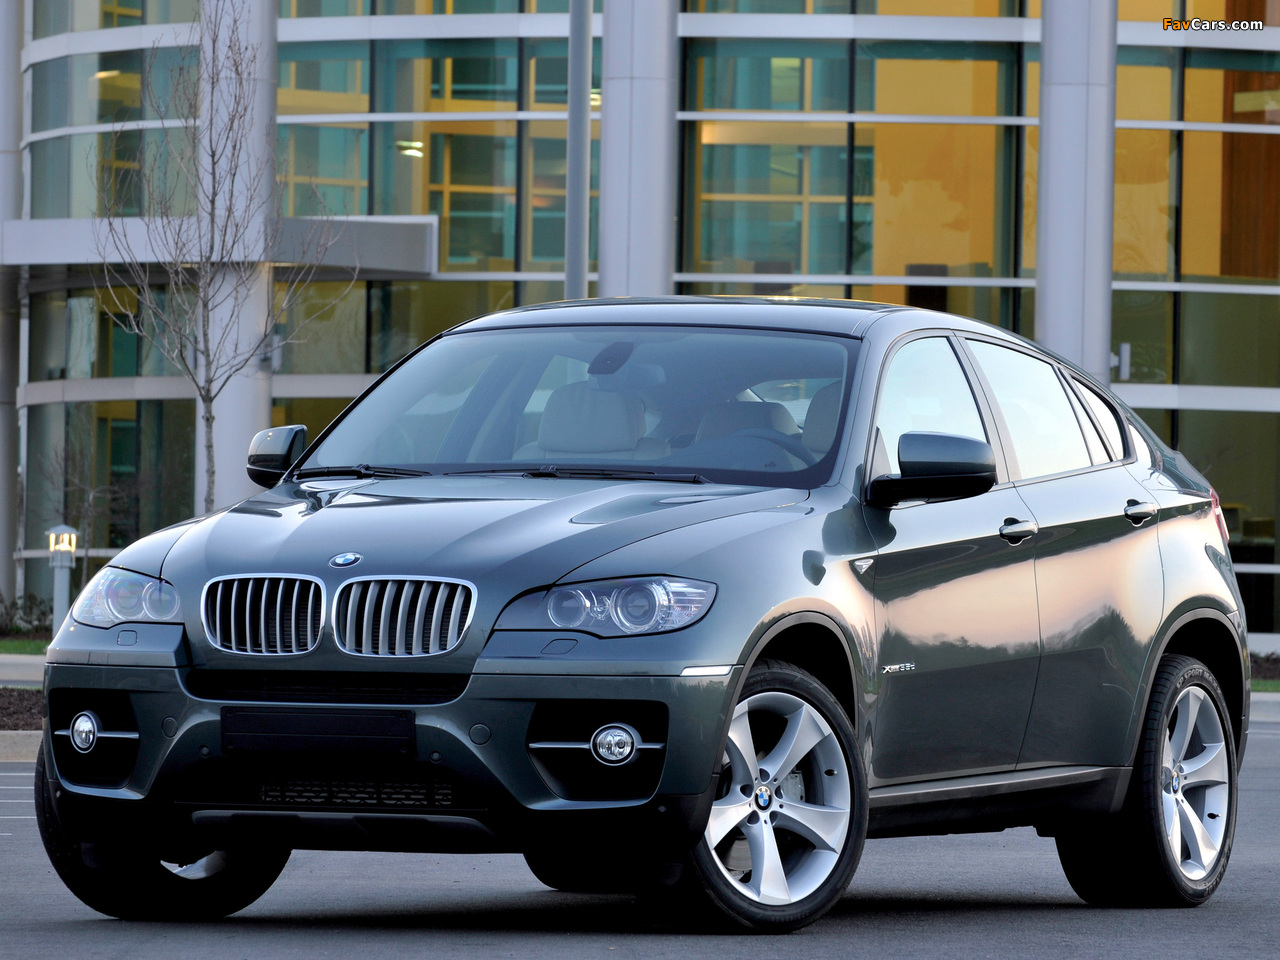 BMW X6 xDrive35d (71) 2008 pictures (1280 x 960)